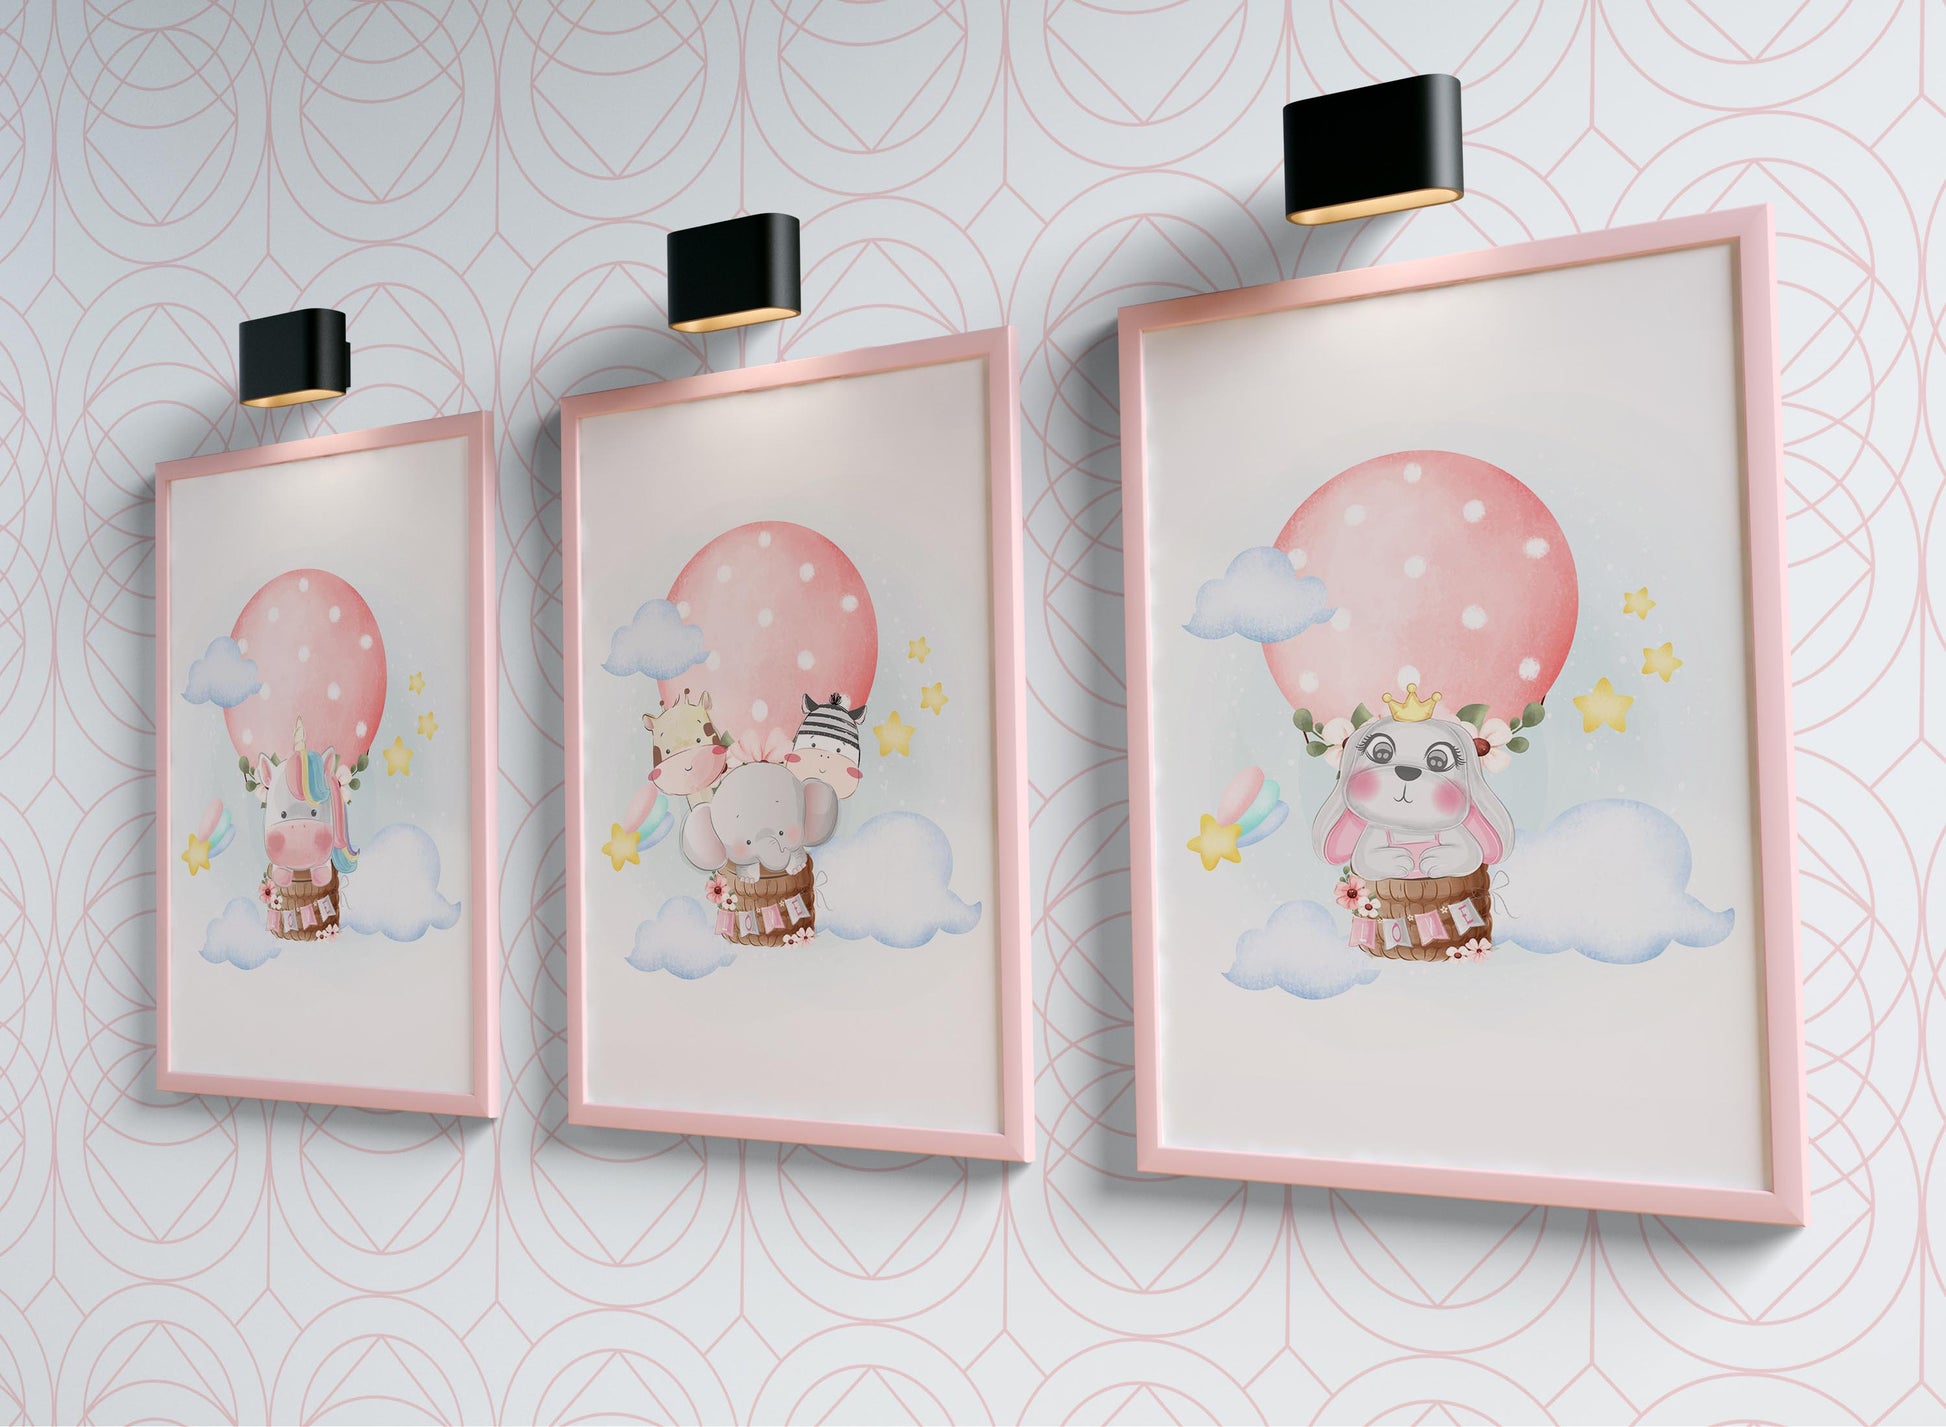 Customized nursery wall art with adorable baby shower theme.